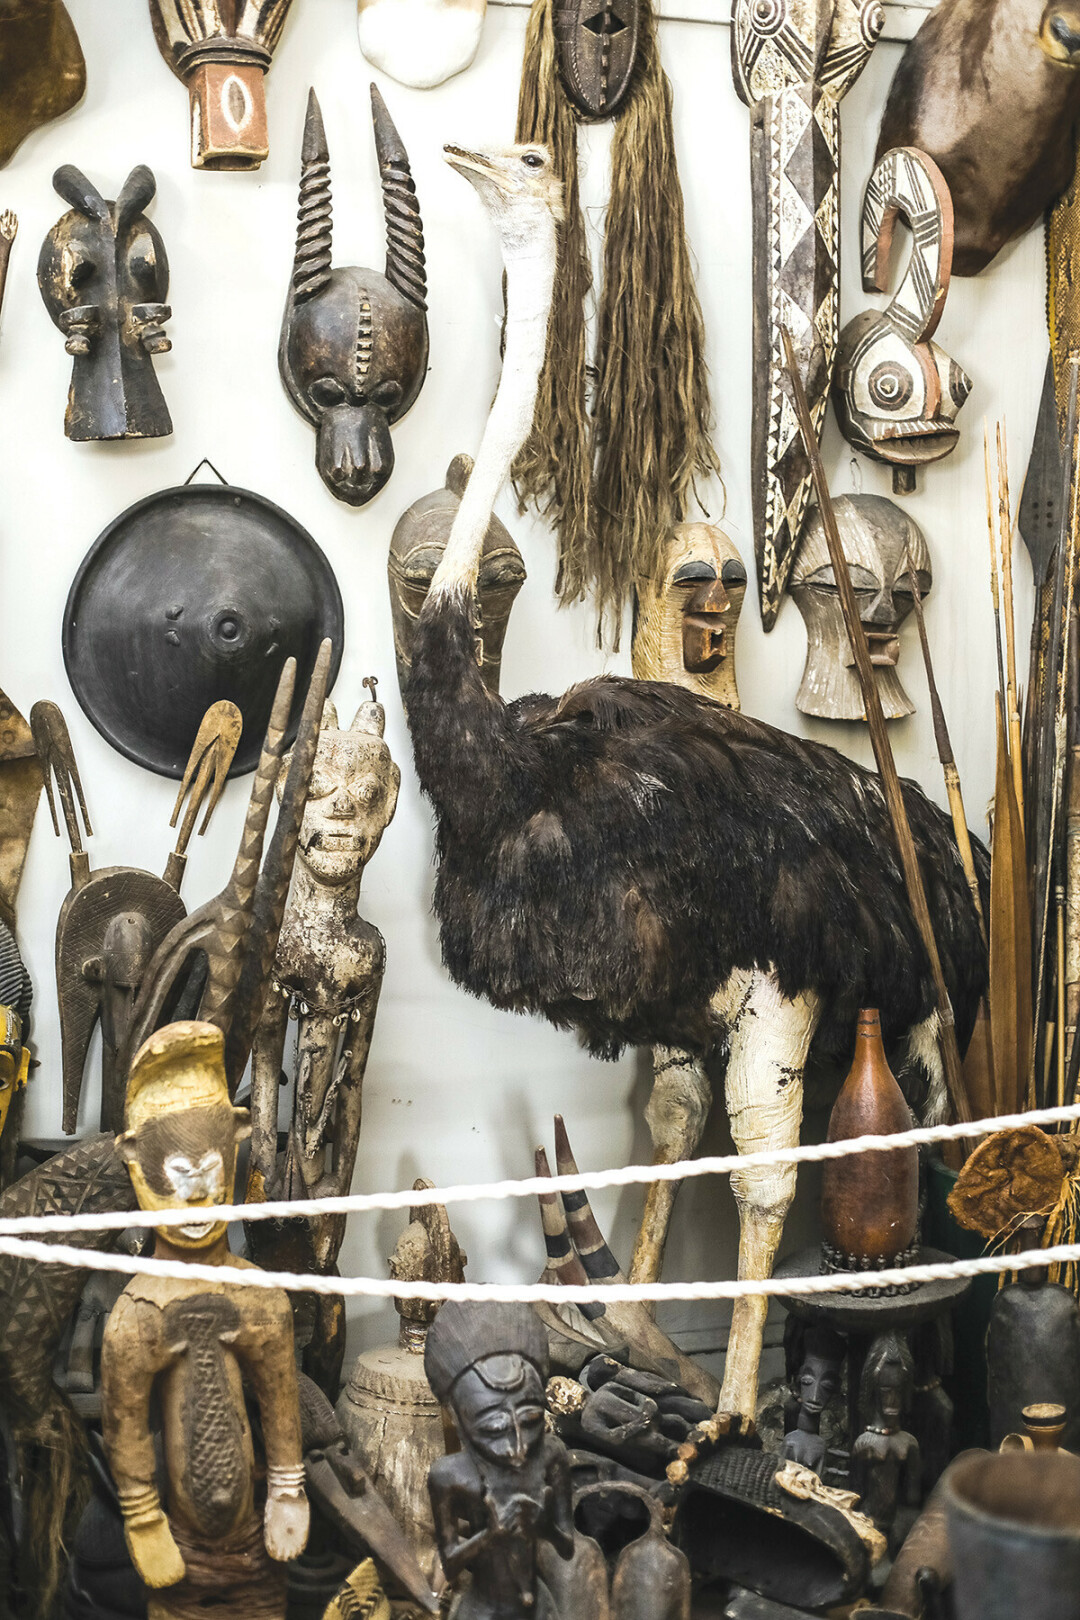 With its numerous displays of taxidermy and other items from around the world, the Antique Emporium is part retail store, part museum.